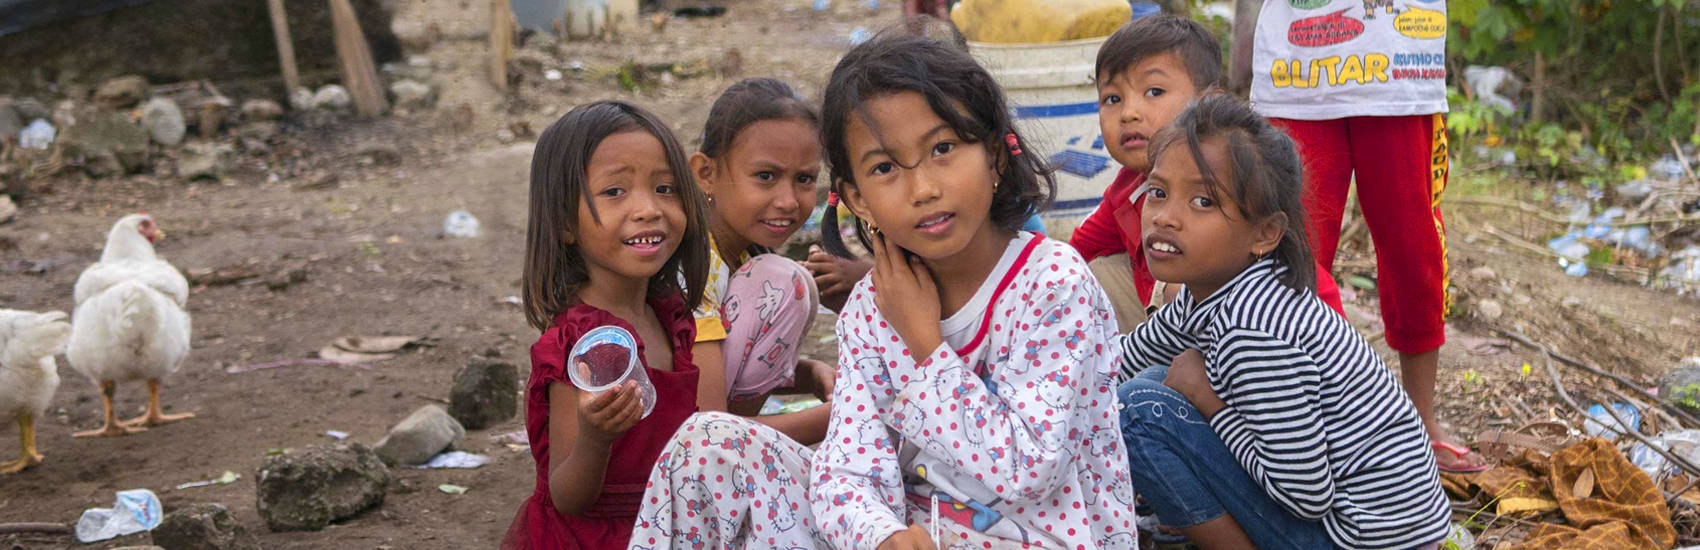 A group of seven young children are gathered in a space littered with branches, blankets and trash. When their homes were destroyed in the 2018 Indonesia earthquake and tsunami, theylived in a temporary shelter and survived on supplies provided by Save the Children and other aid organizations. Photo credit: Ardiles Rante / Save the Children, Oct 2018.